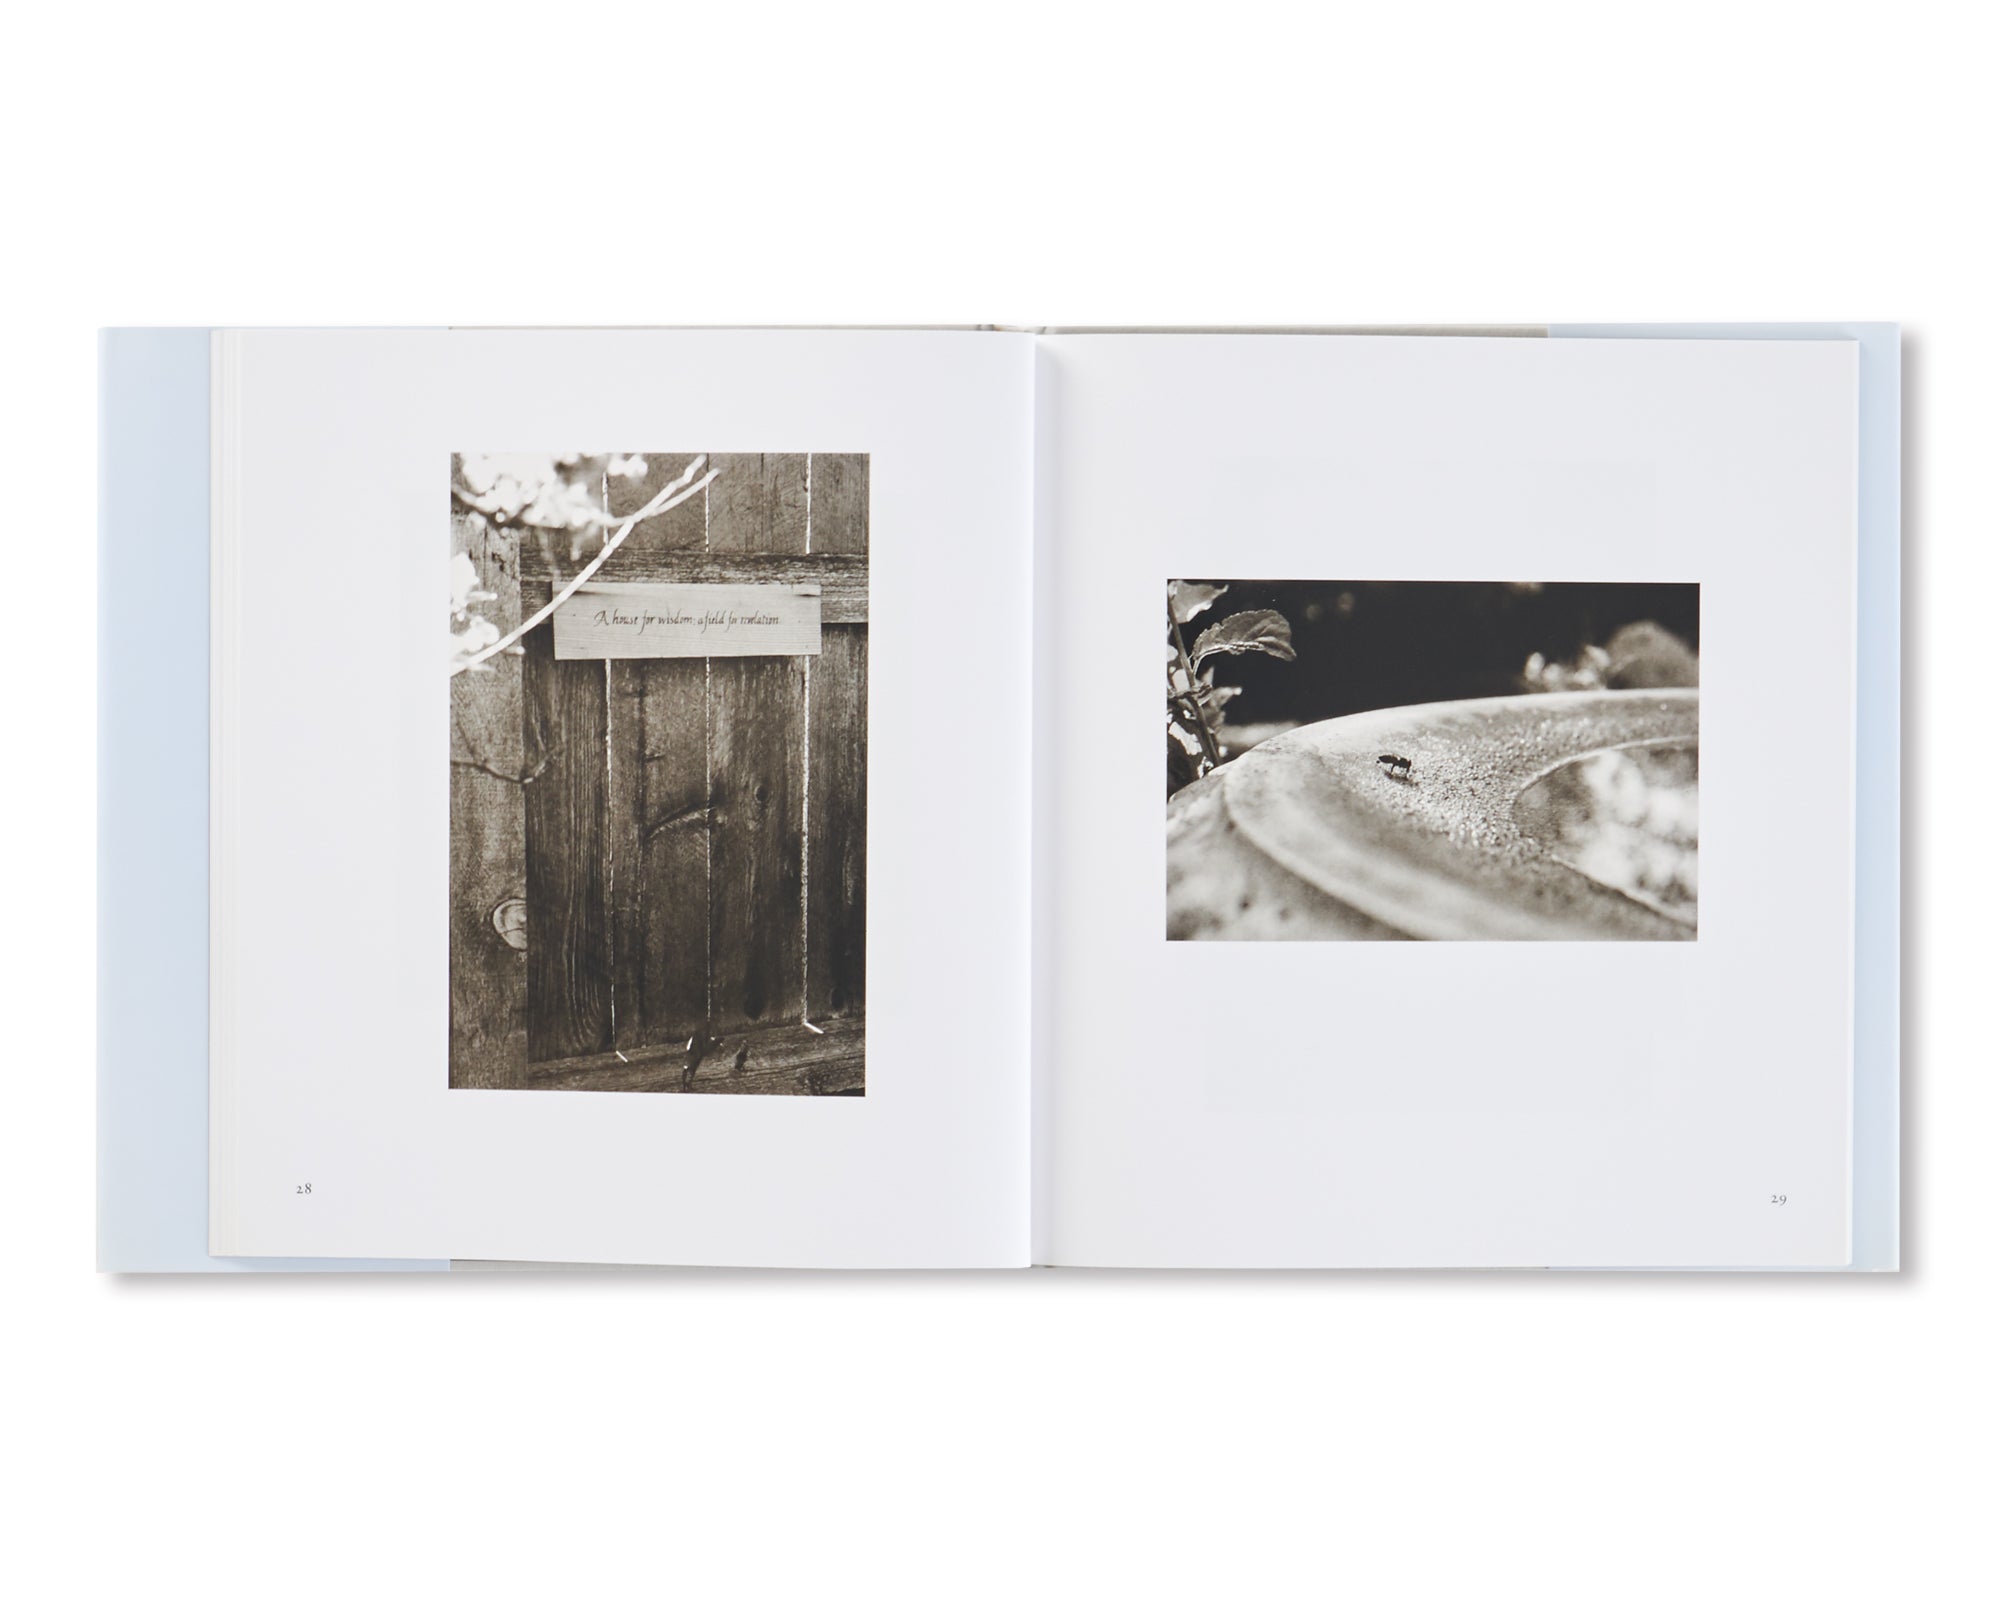 I HEAR THE LEAVES AND LOVE THE LIGHT by Robert Adams [SIGNED]